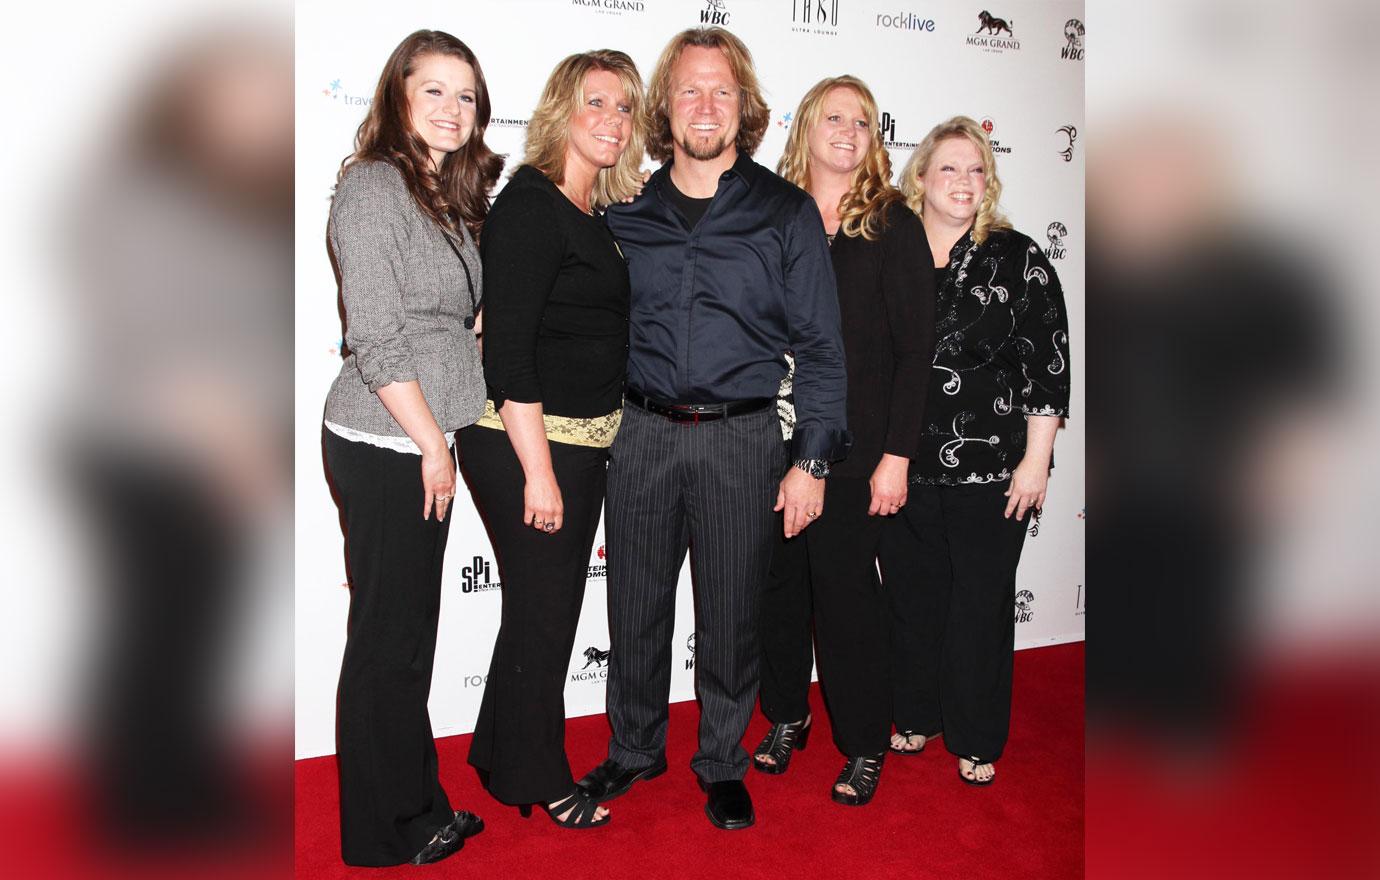 sister wives stars kody brown and legally married wife robyn brown reportedly owe dollar in taxes